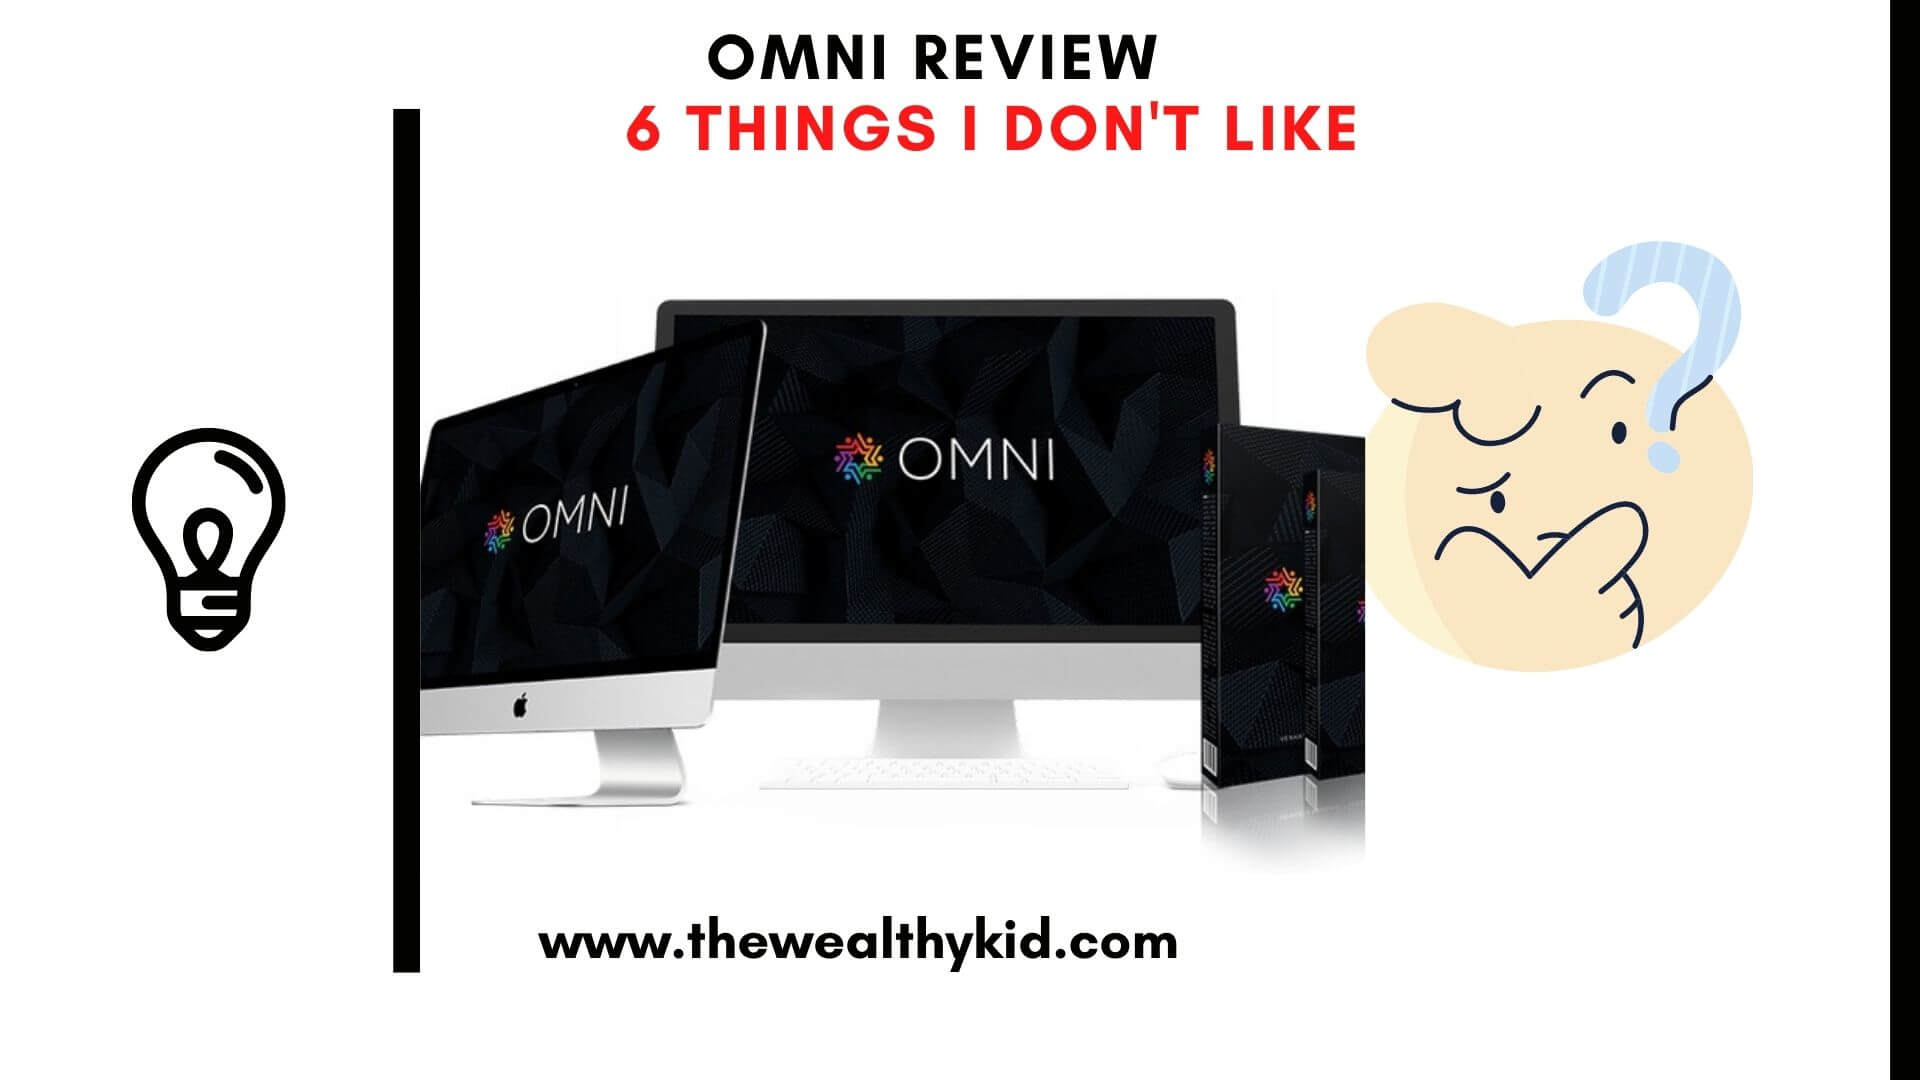 OMNI SOFTWARE REVIEW – 6 Things I Don’t Like